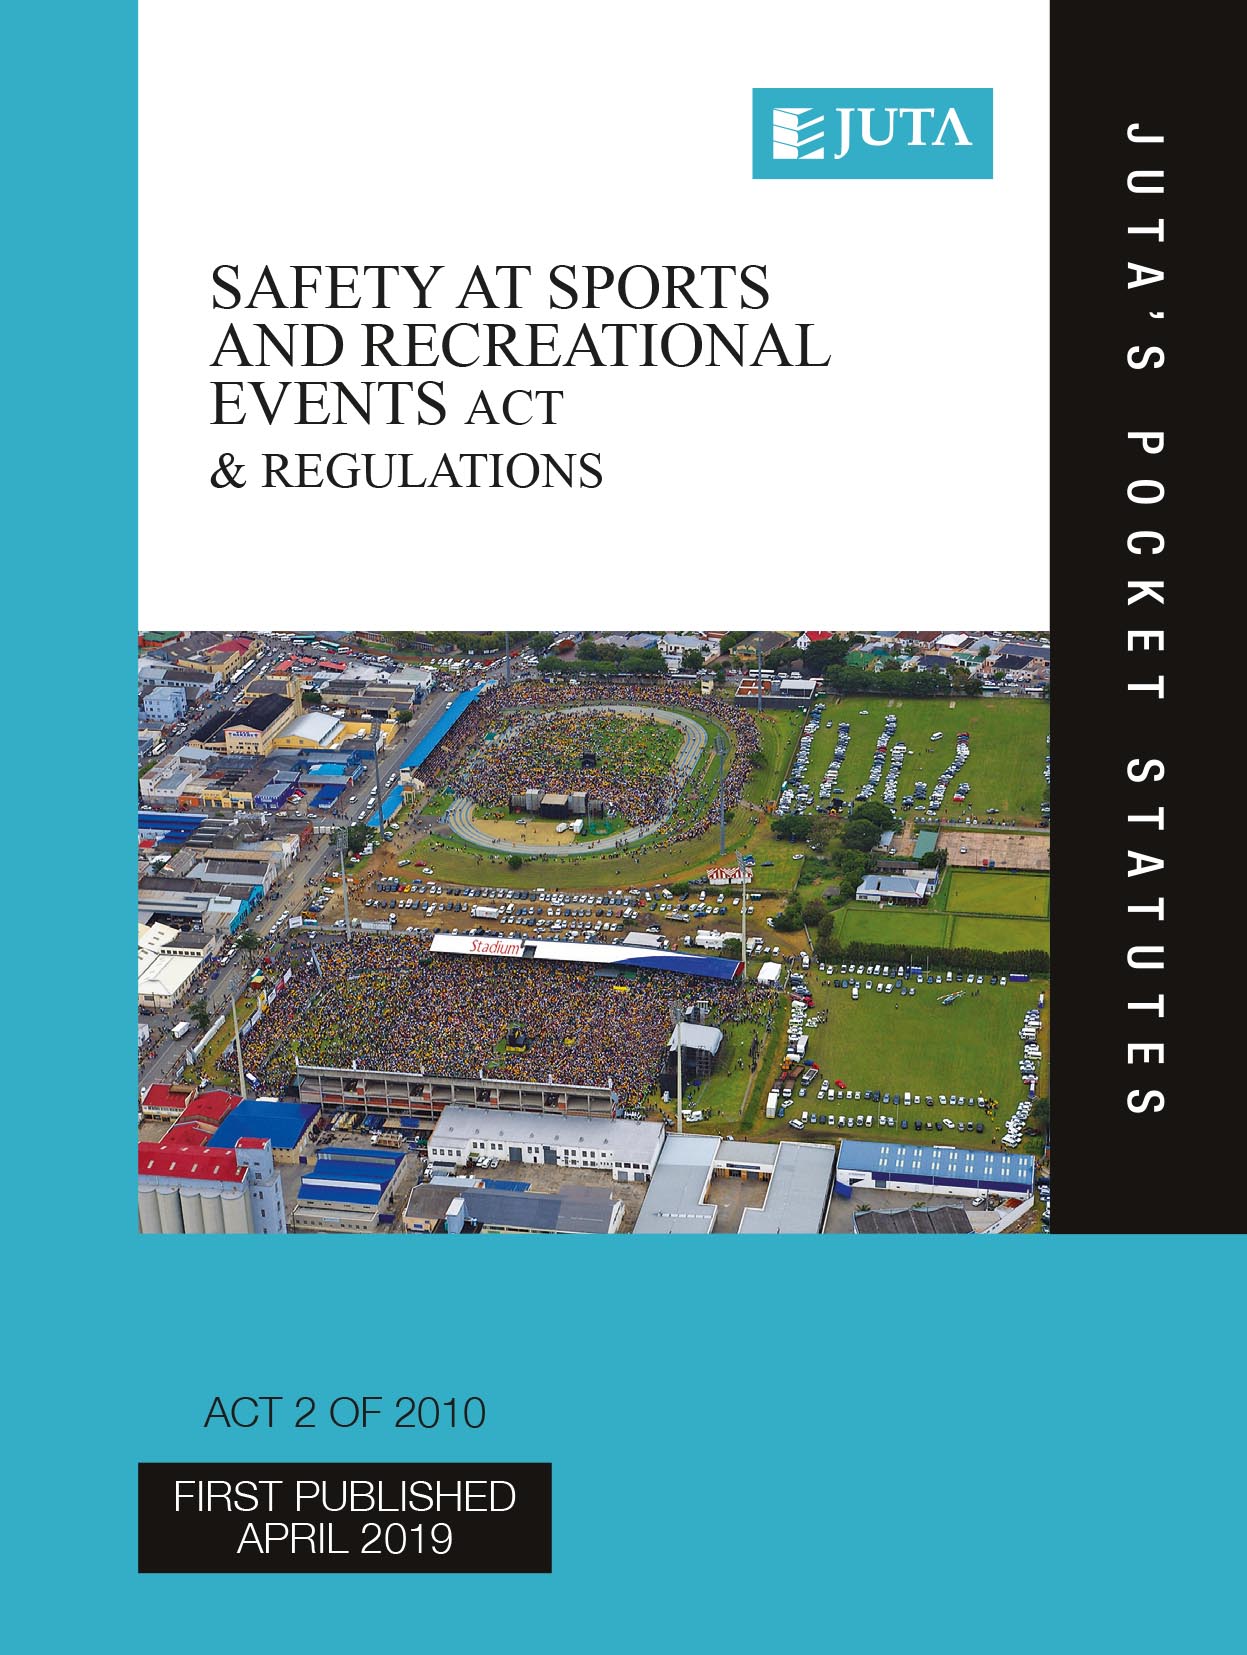 Safety at Sports and Recreational Events Act 2 of 2010 & Regulations